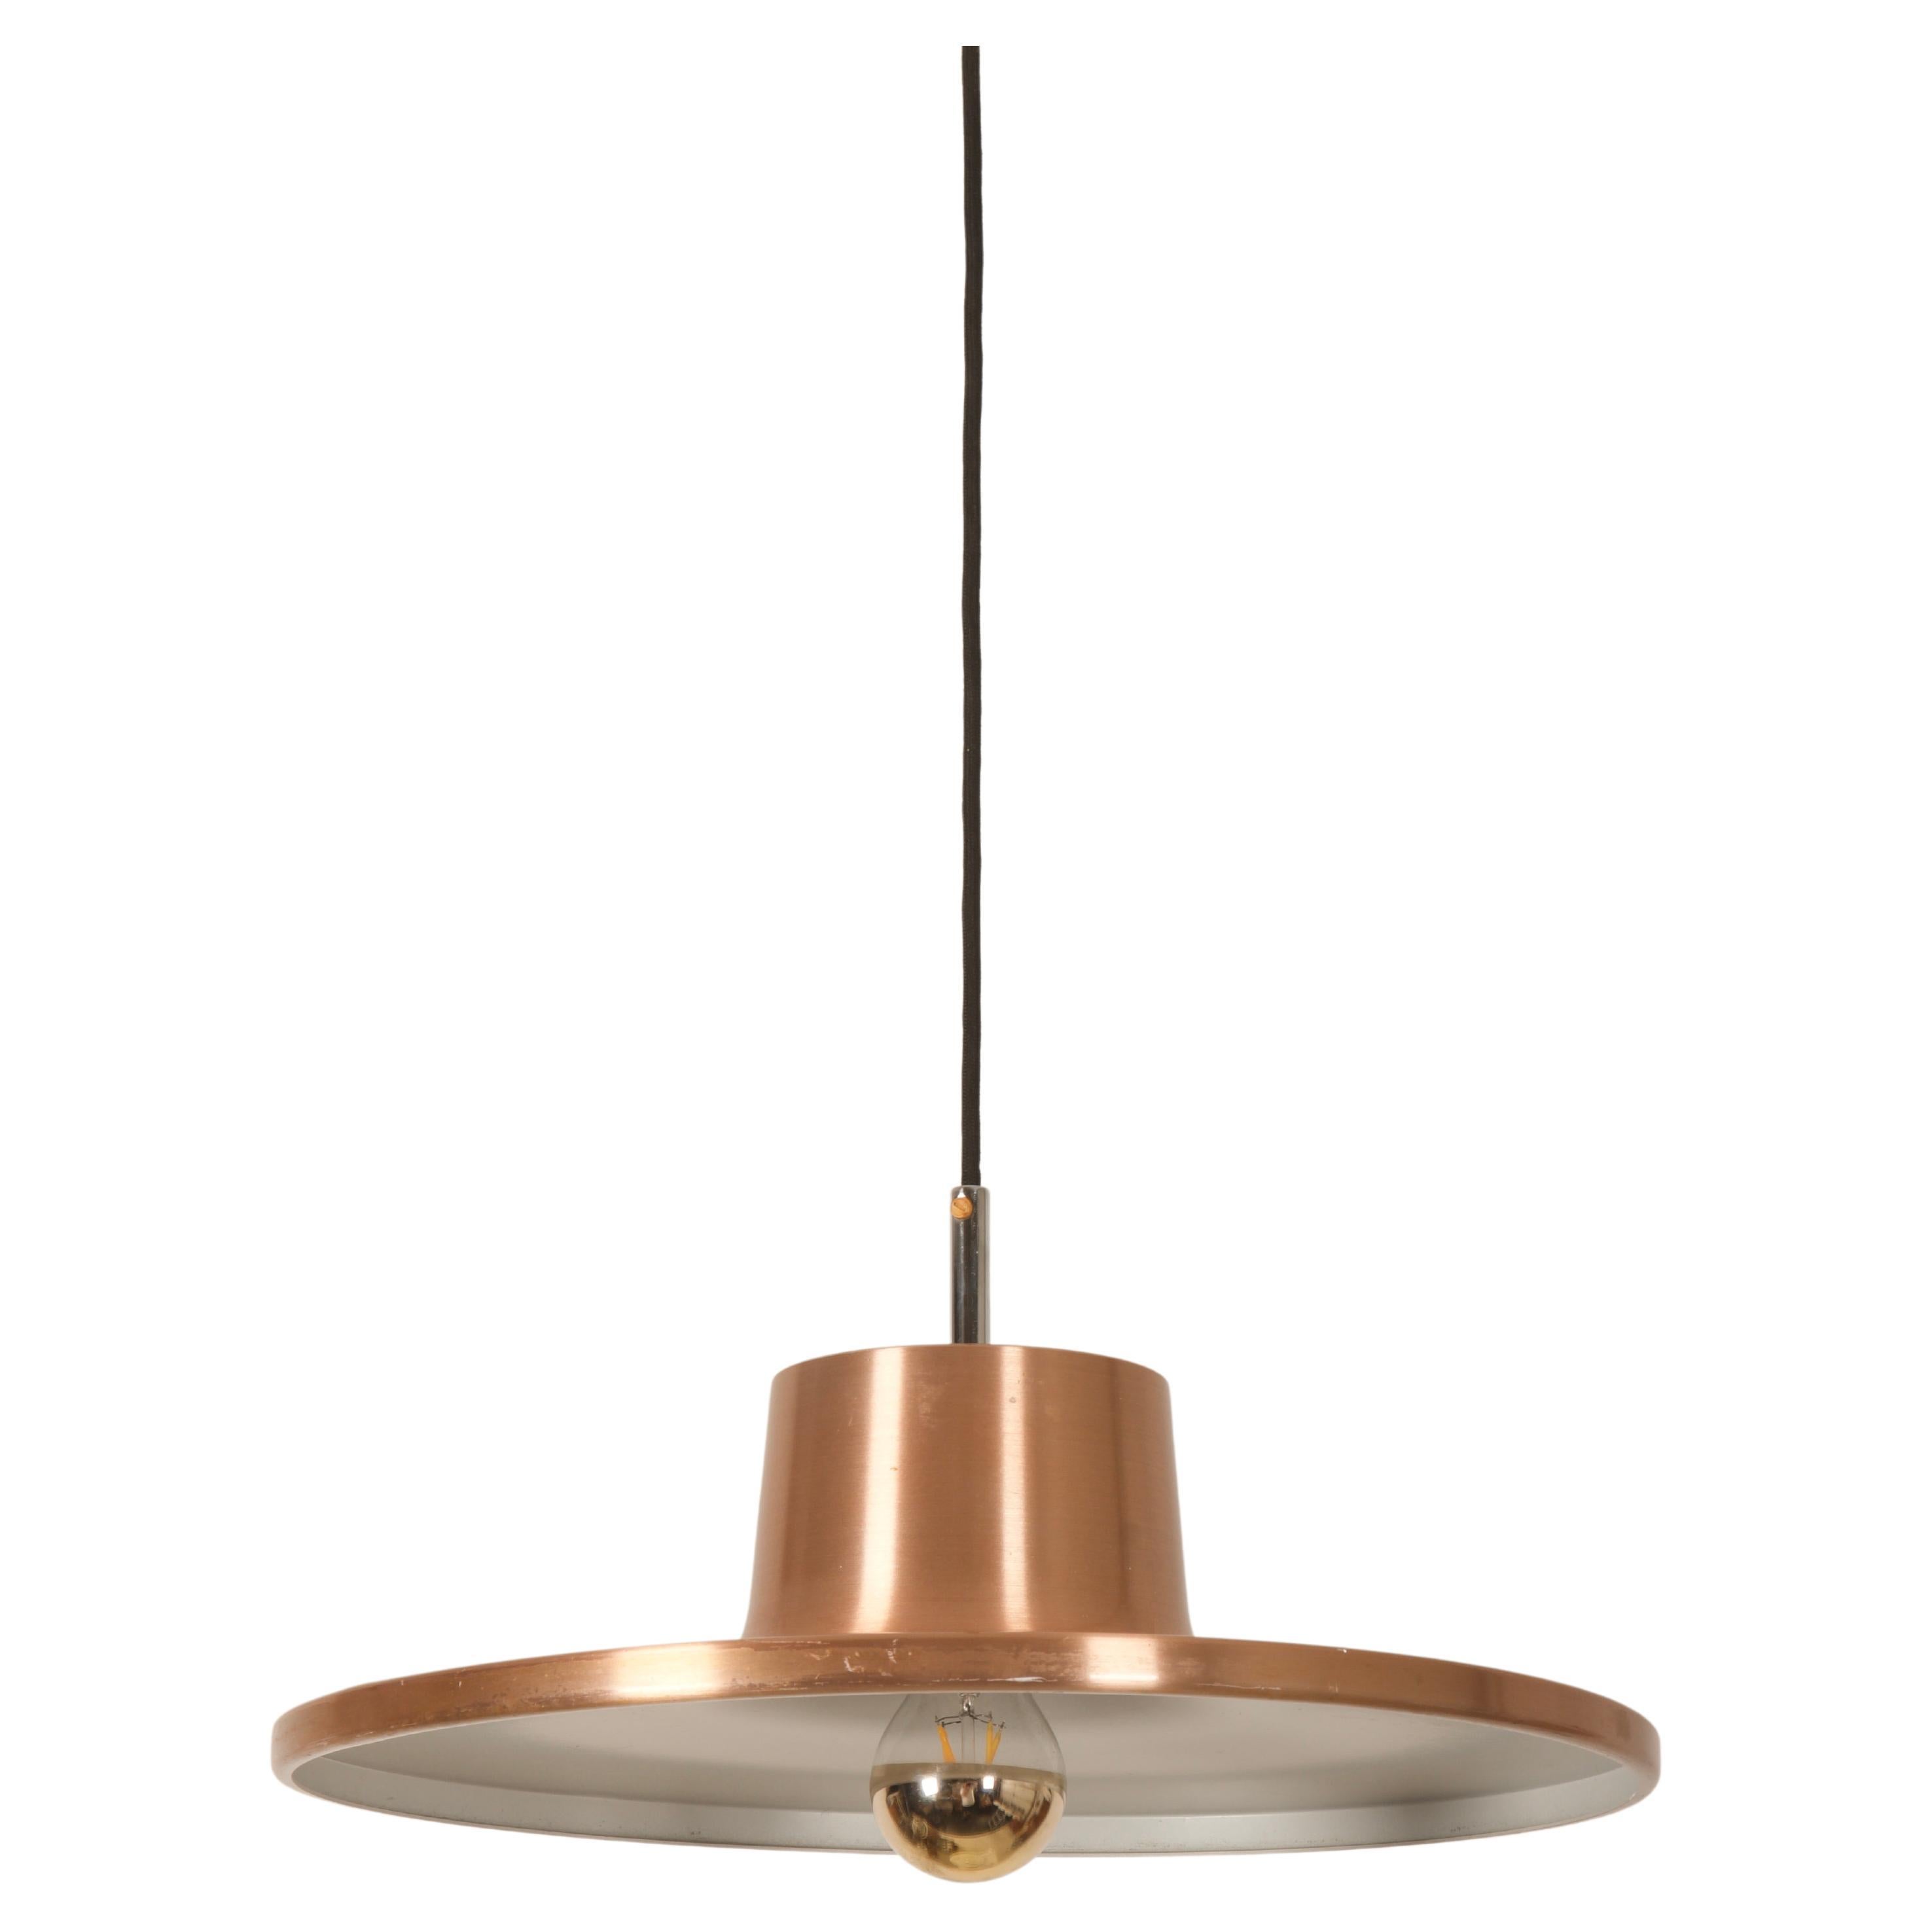 Aluminum shade copper plated fitted with one W27 socket. Made in Denmark in the 1970s.